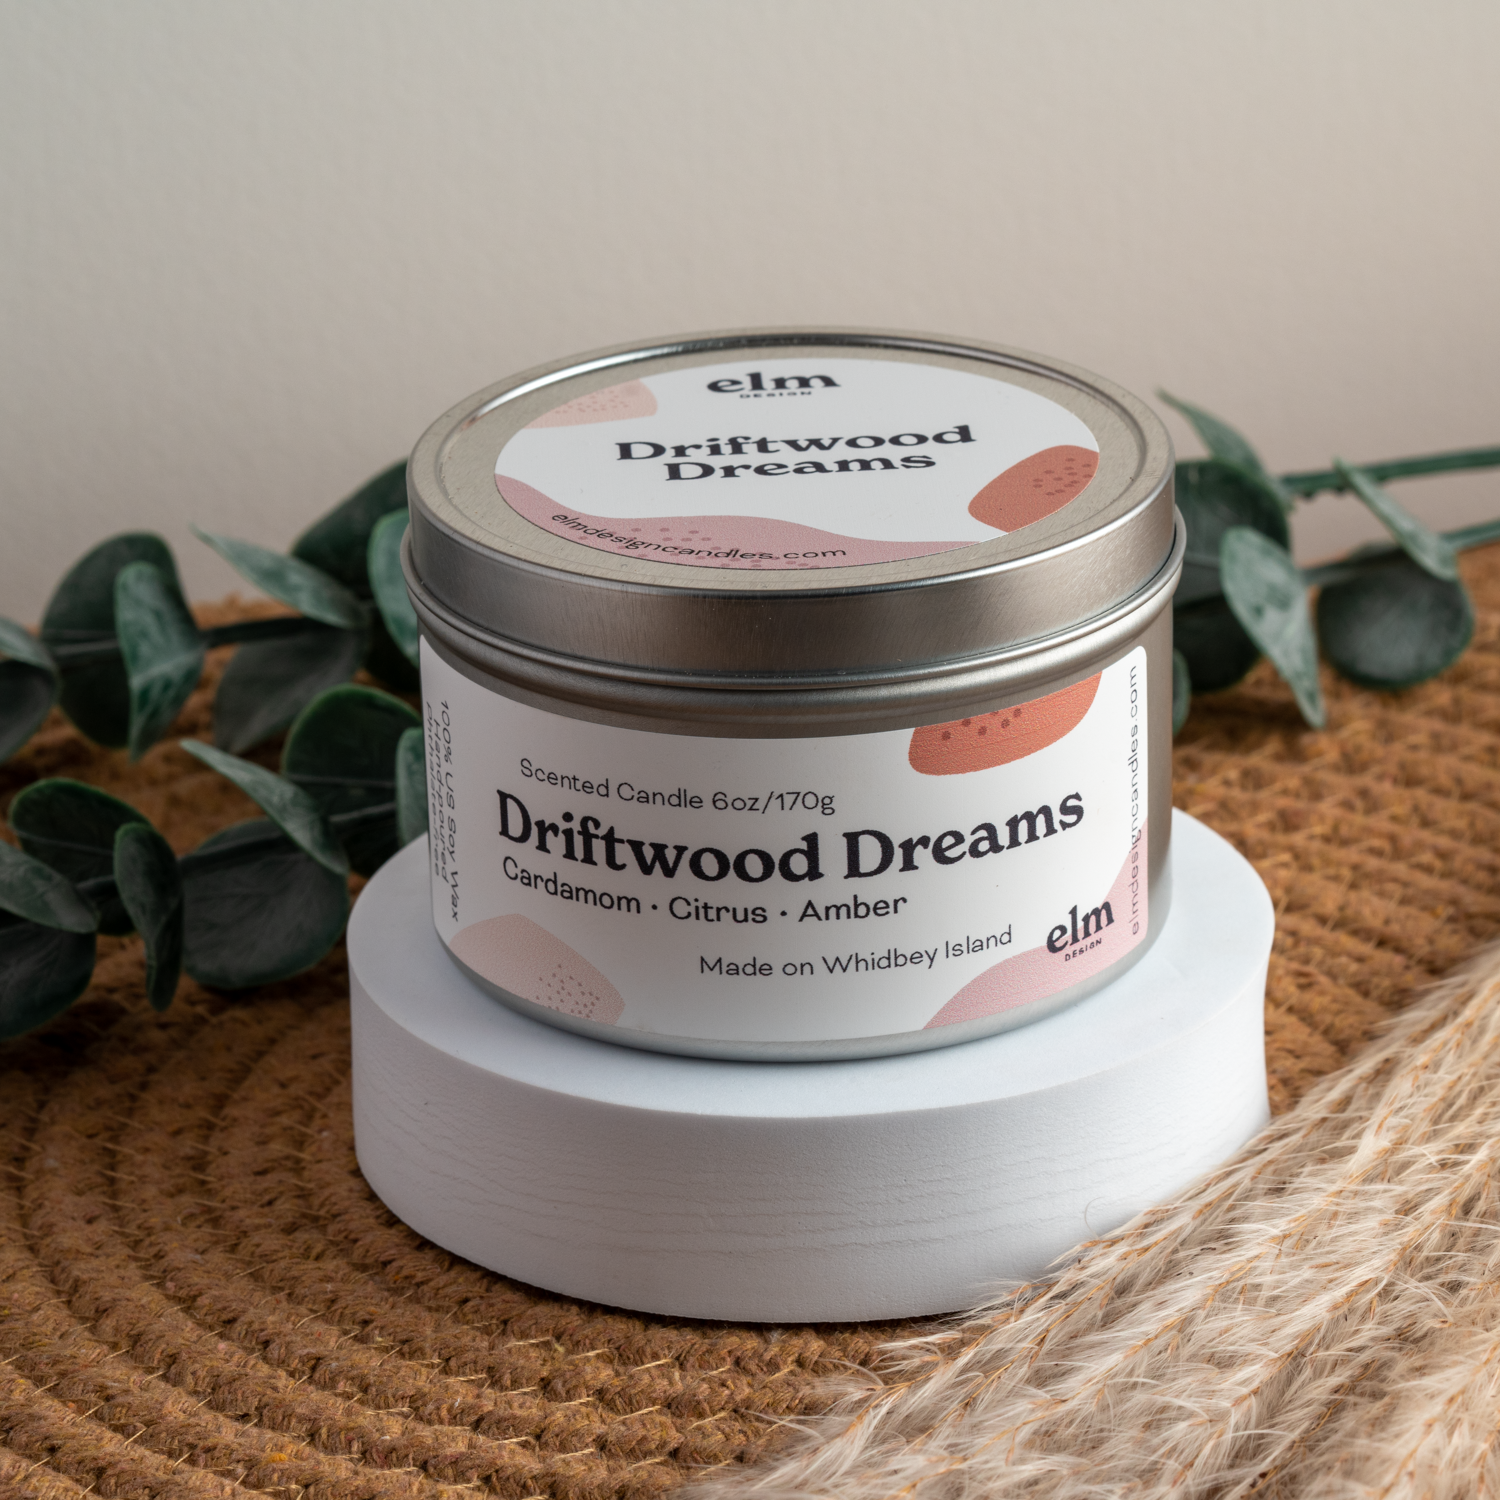 Driftwood Dreams scented soy candle in colorfully labeled 6 oz container.